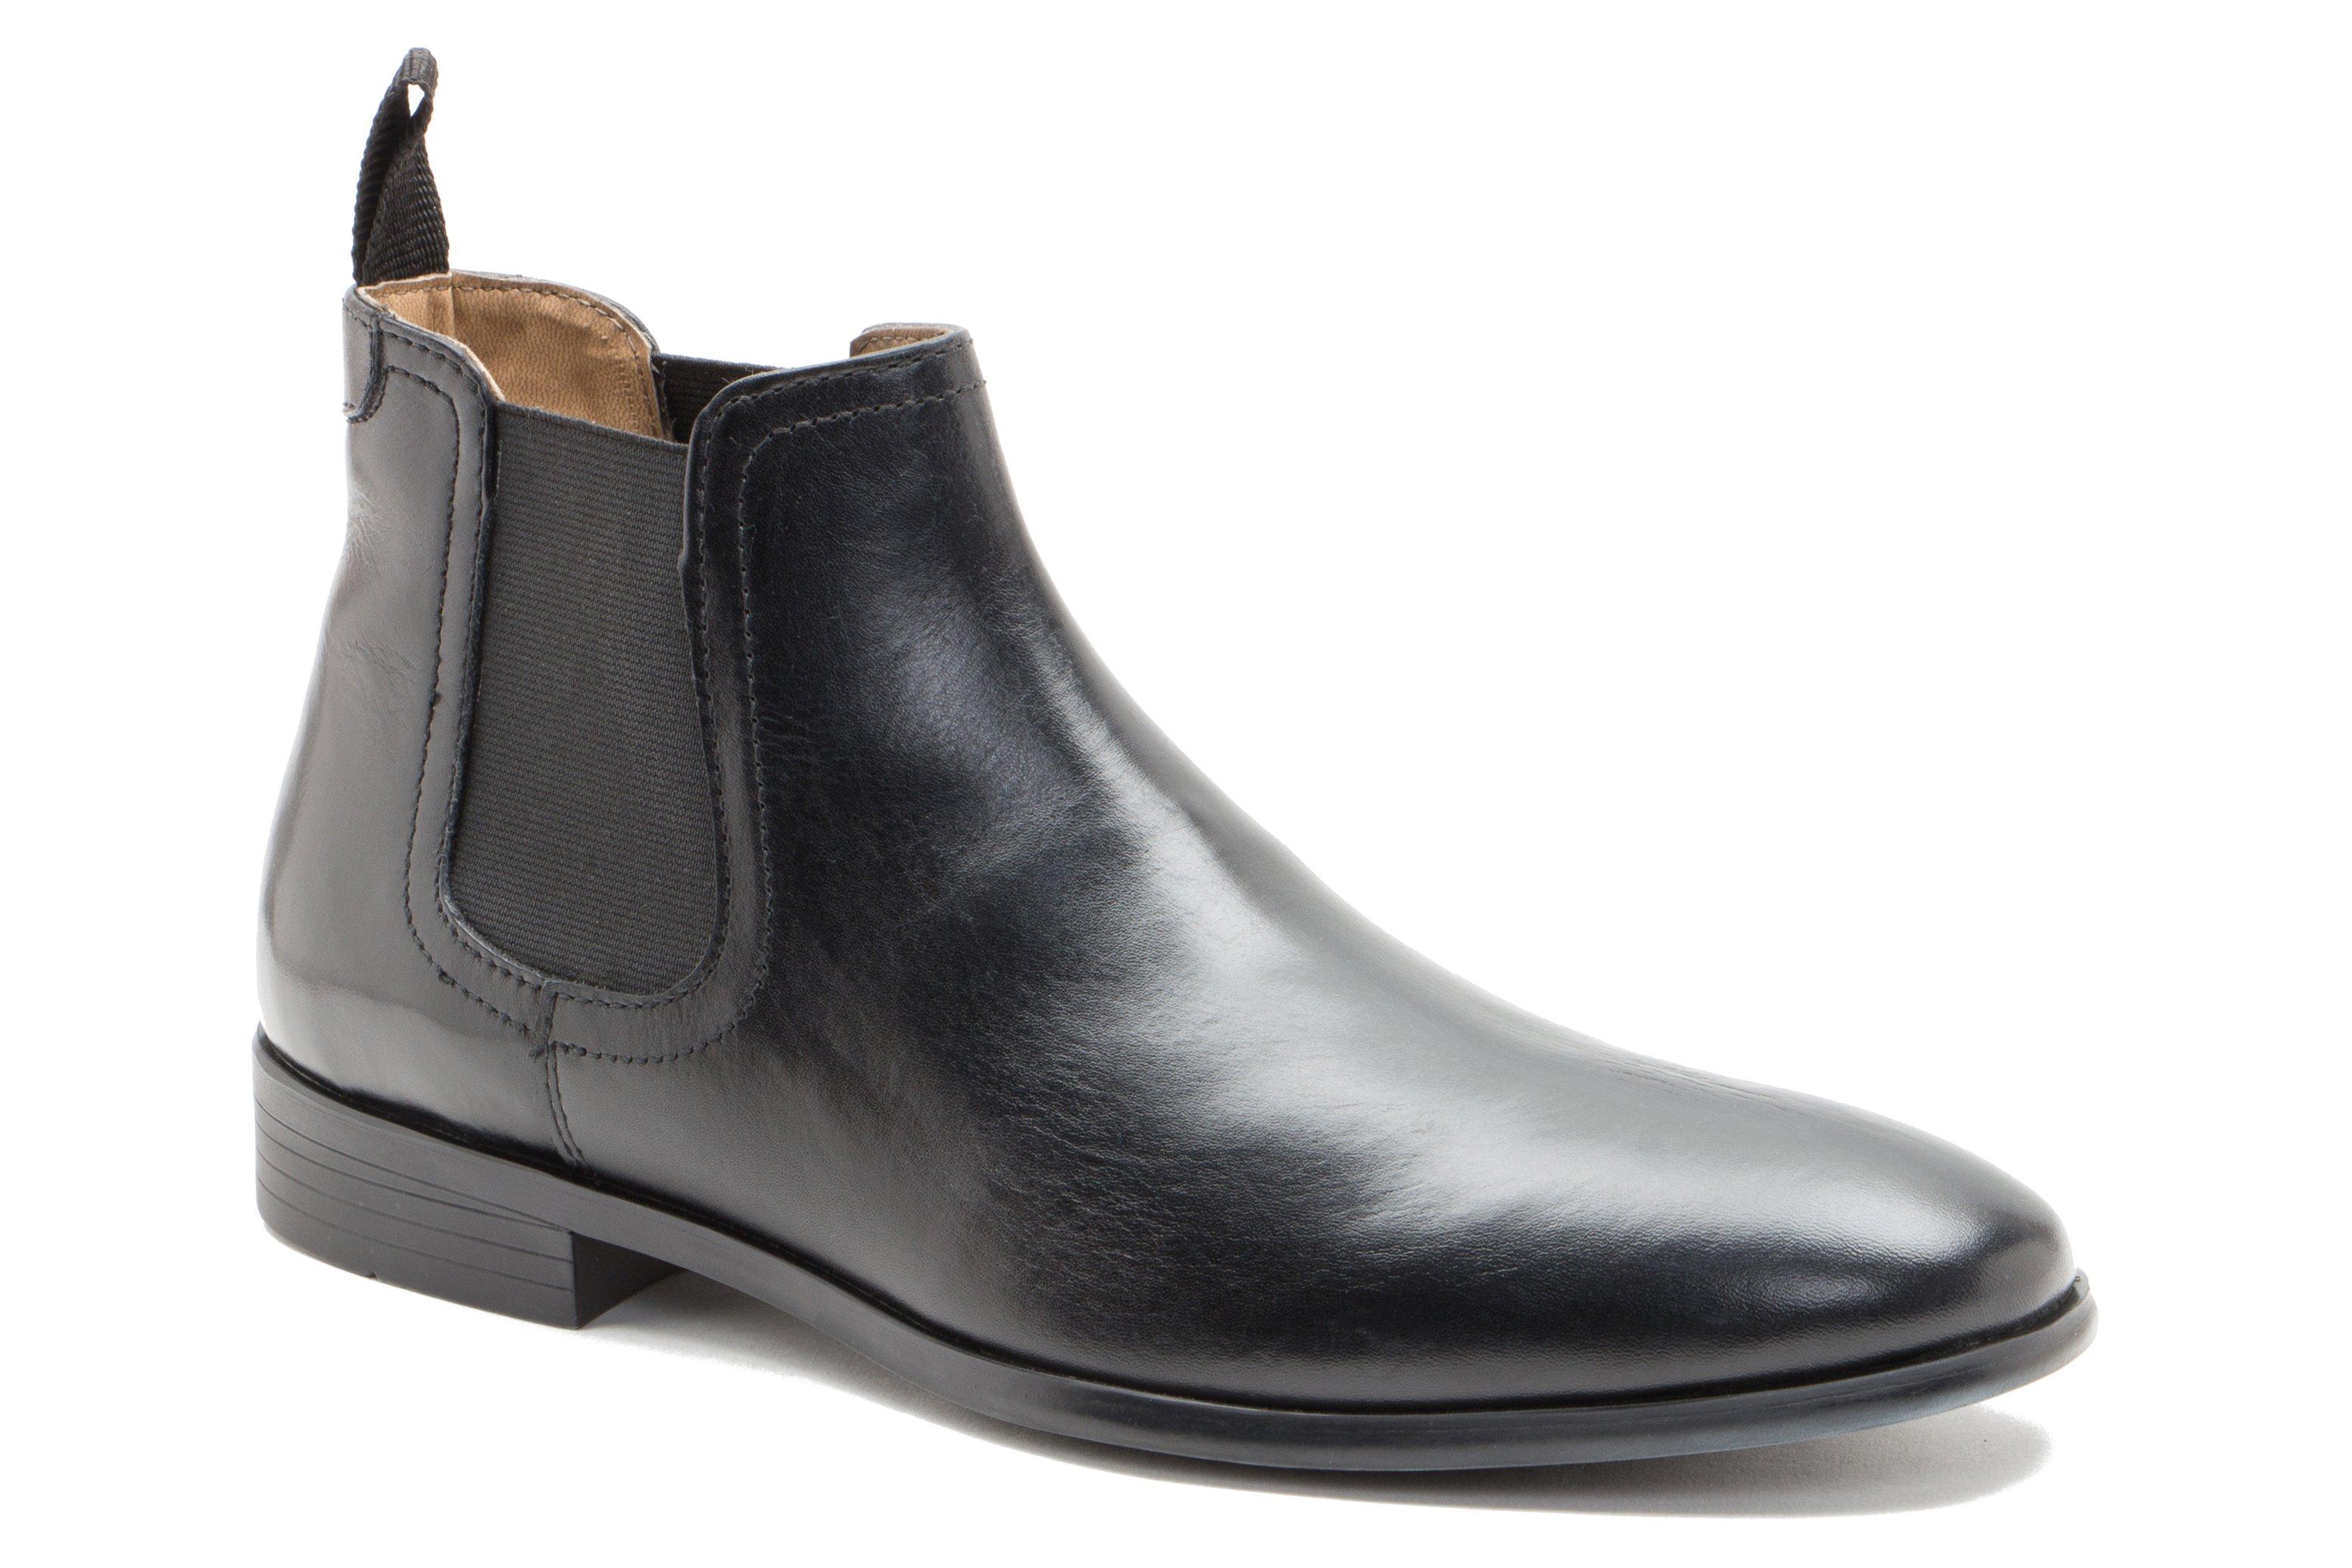 Boots | 'Beeston' Formal Chelsea Leather Boots | Thomas Crick